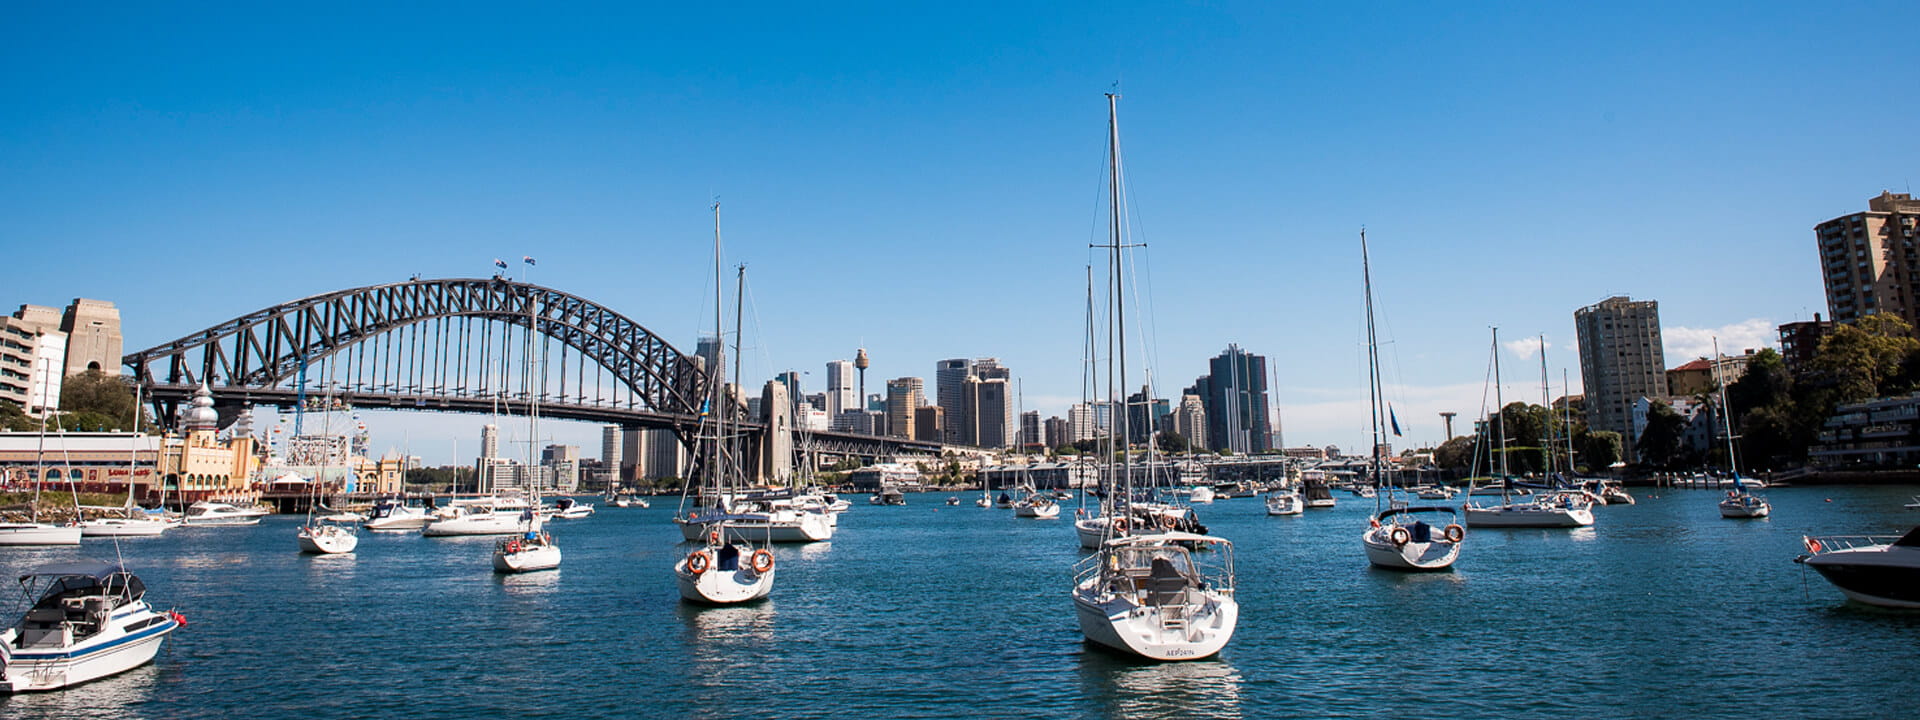 small boats in front of the Harbour Bridge in Sydney